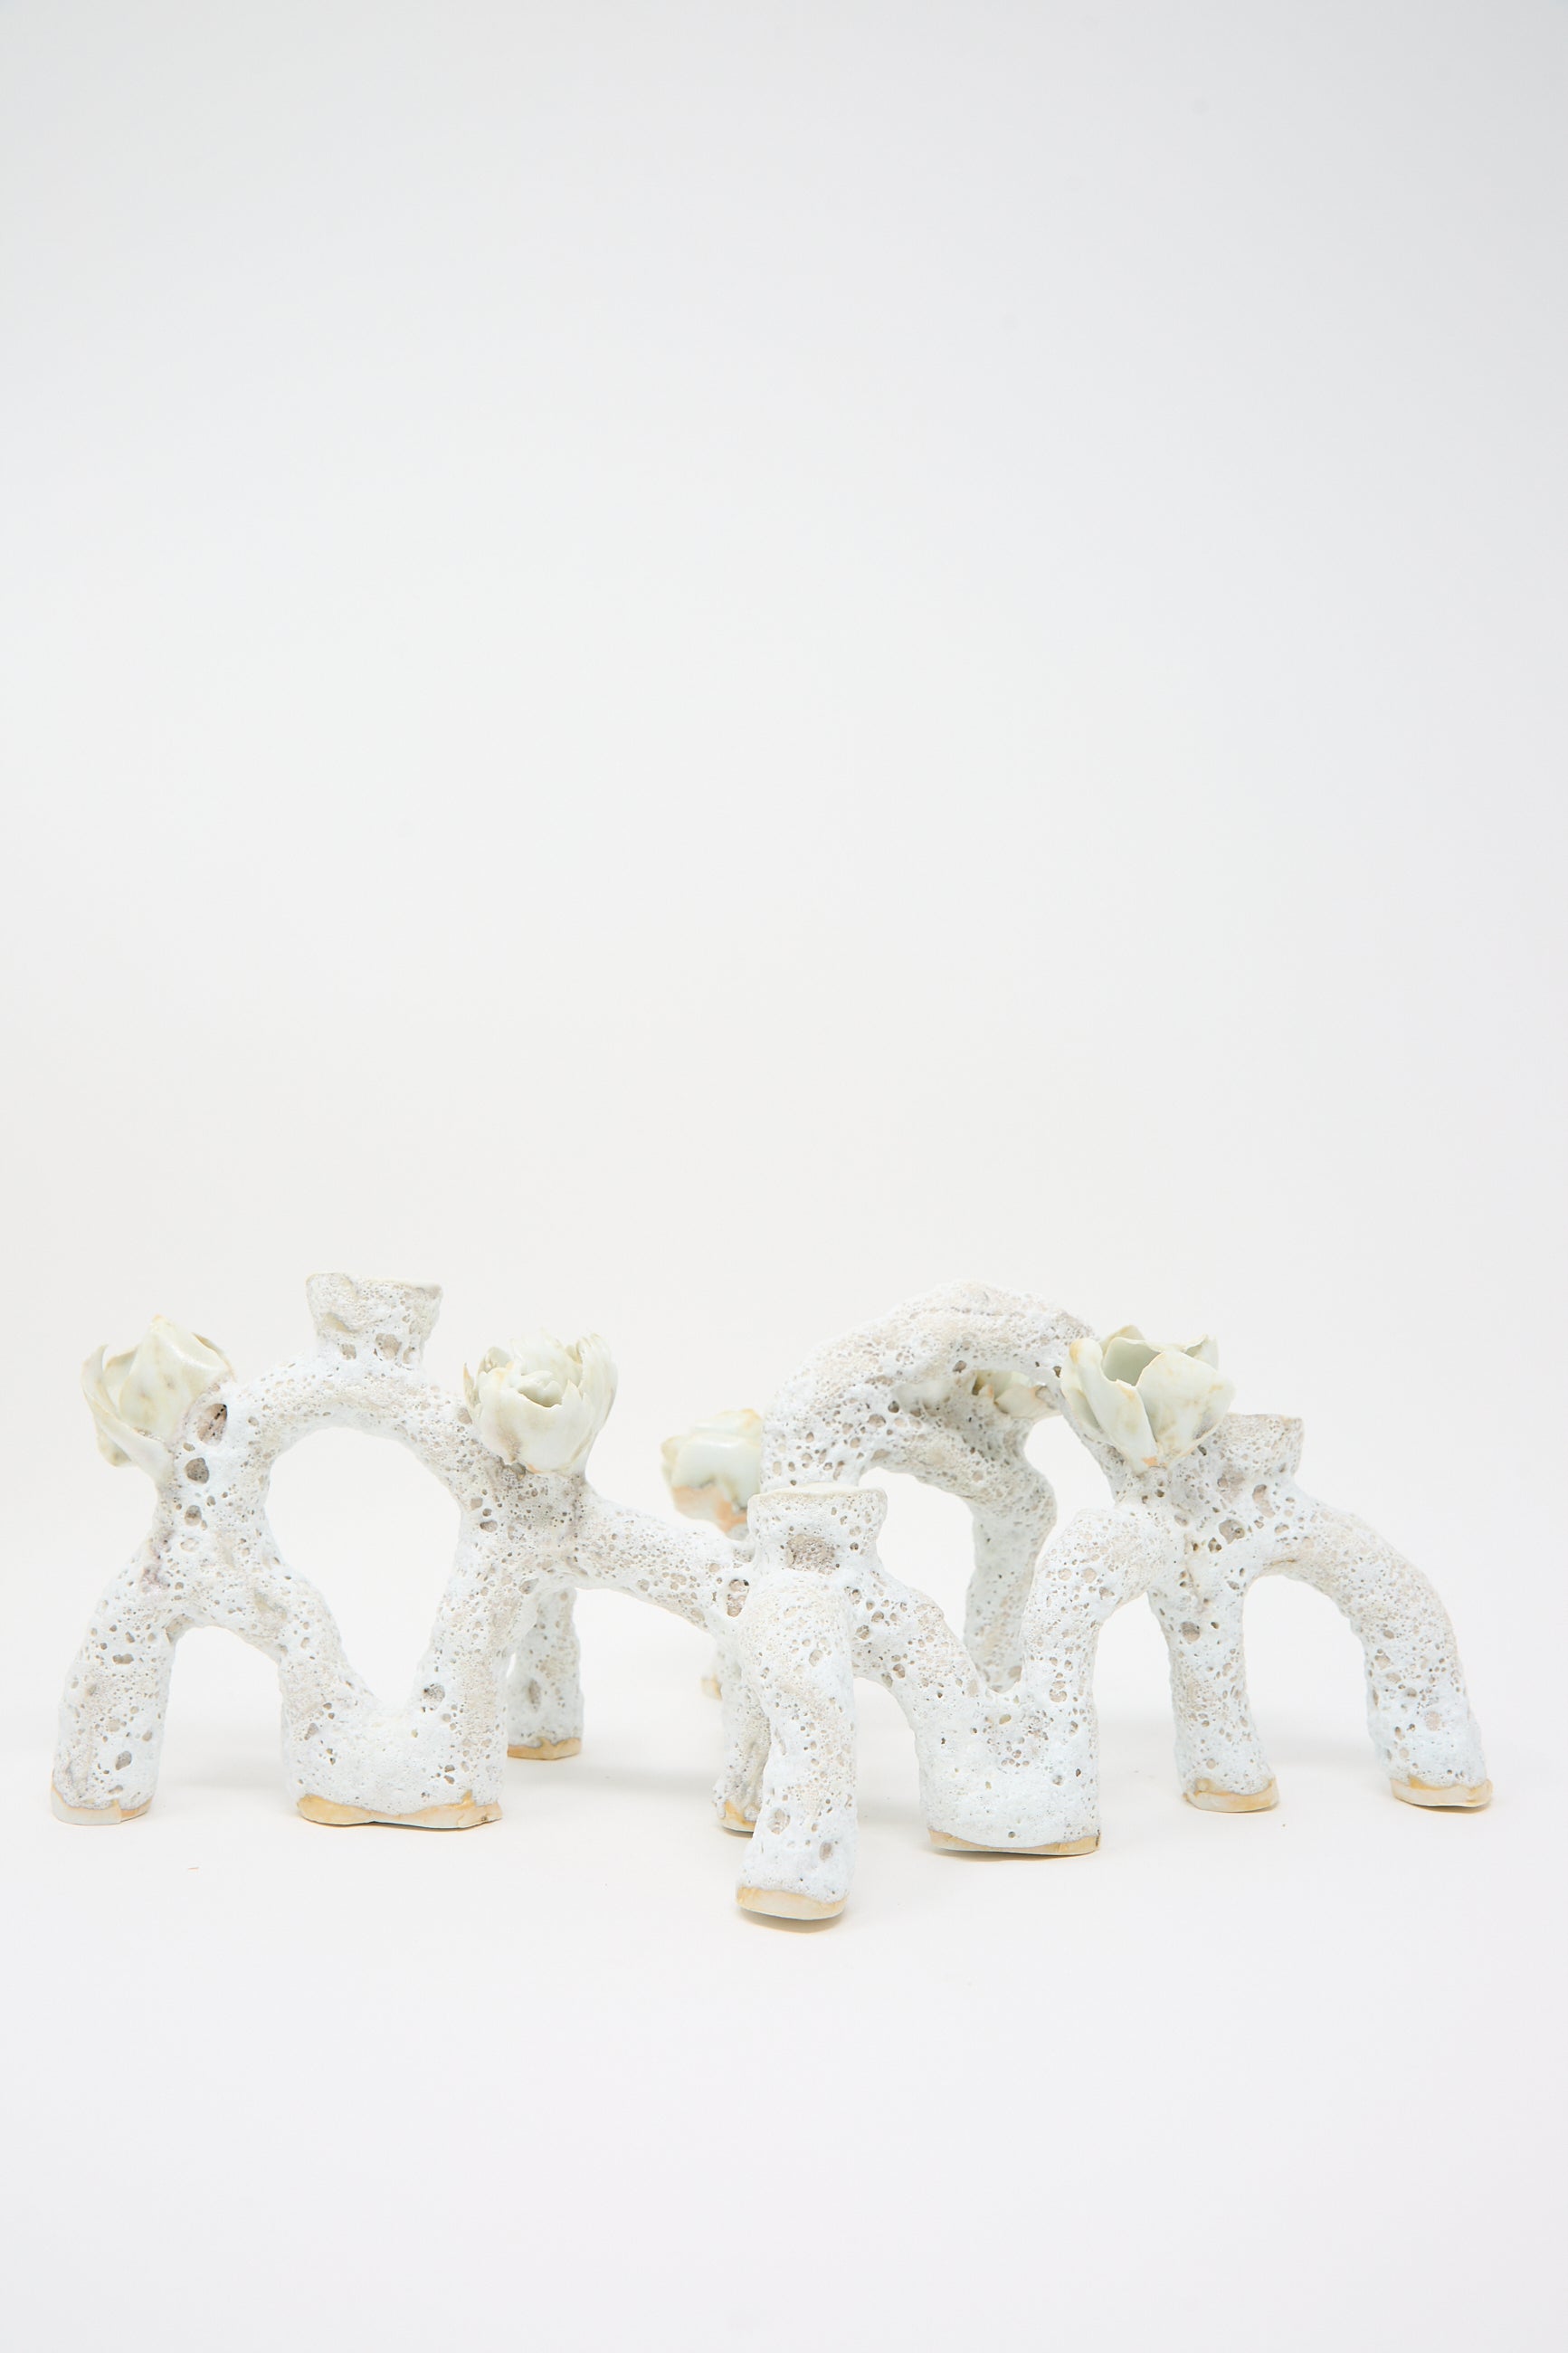 A photo of an abstract ceramic sculpture with arch-like shapes and textured surfaces, reminiscent of the Blooming Arches Candle Holder by Dear You, set against a plain white background.